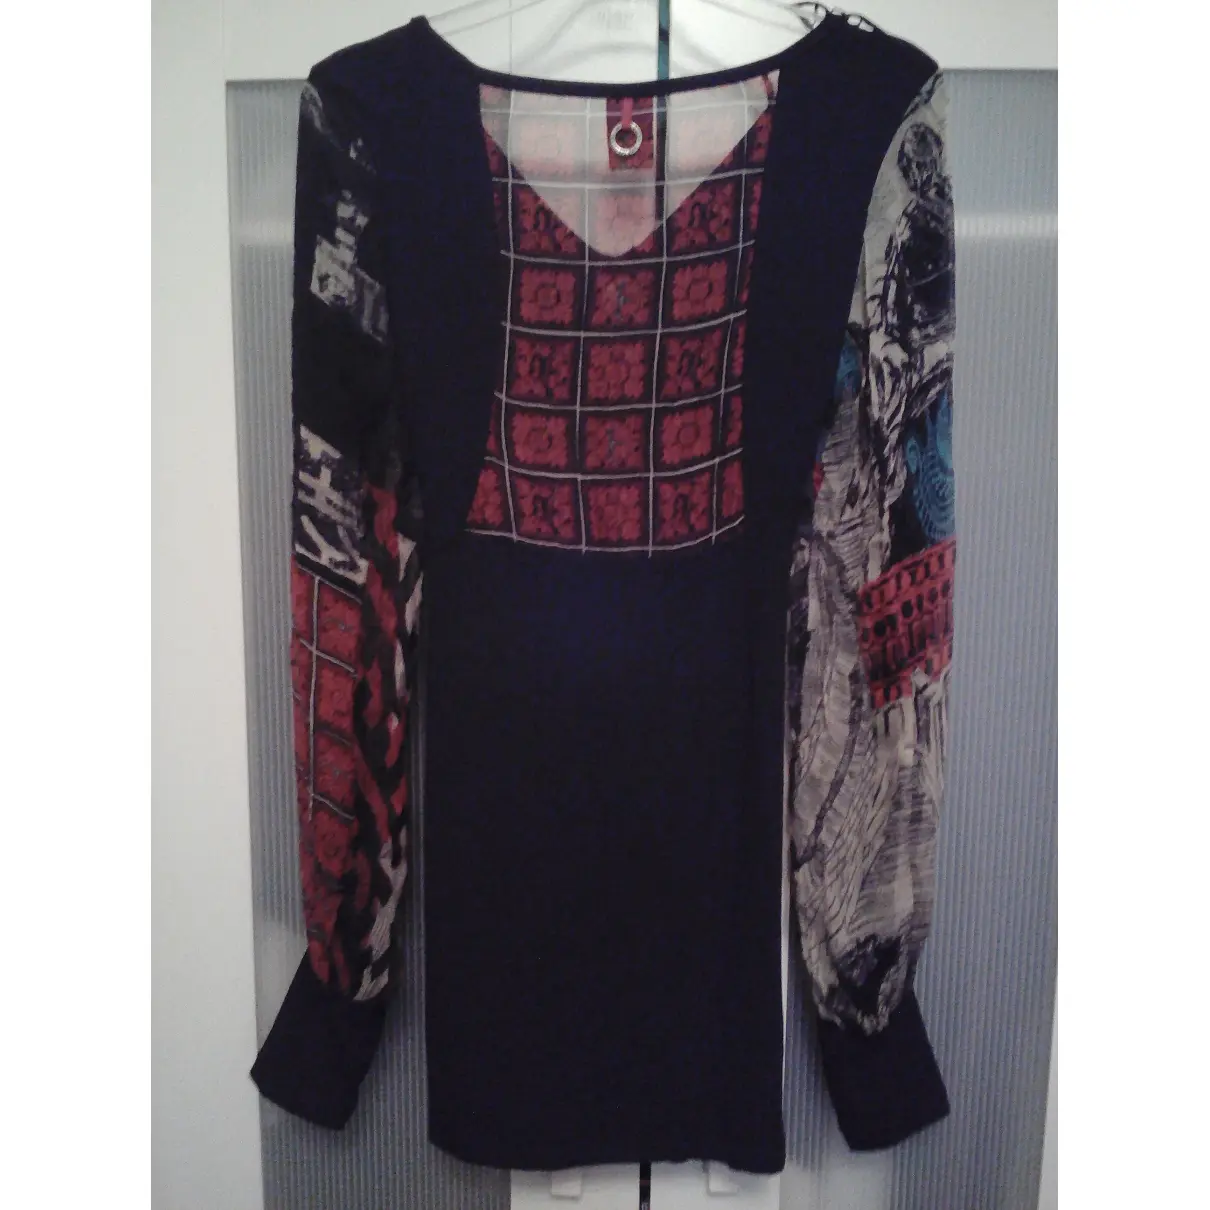 Buy SAVE THE QUEEN Silk tunic online